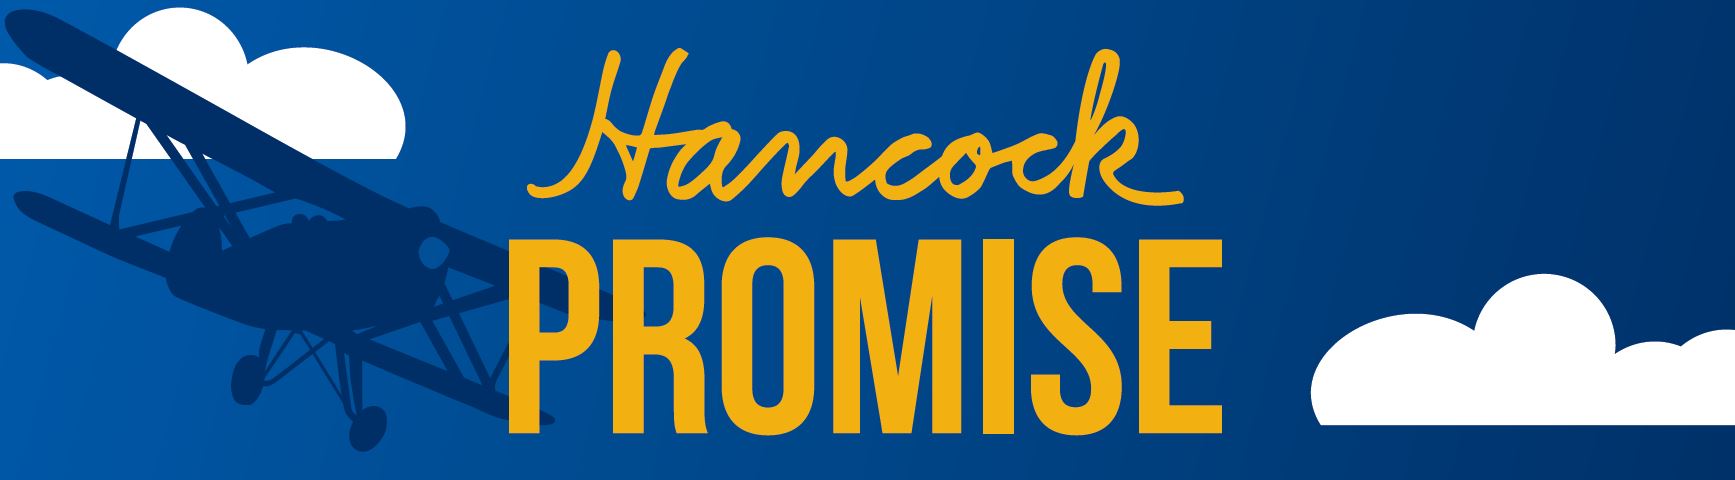 Hancock launches ‘Promise’ endowment with new gifts